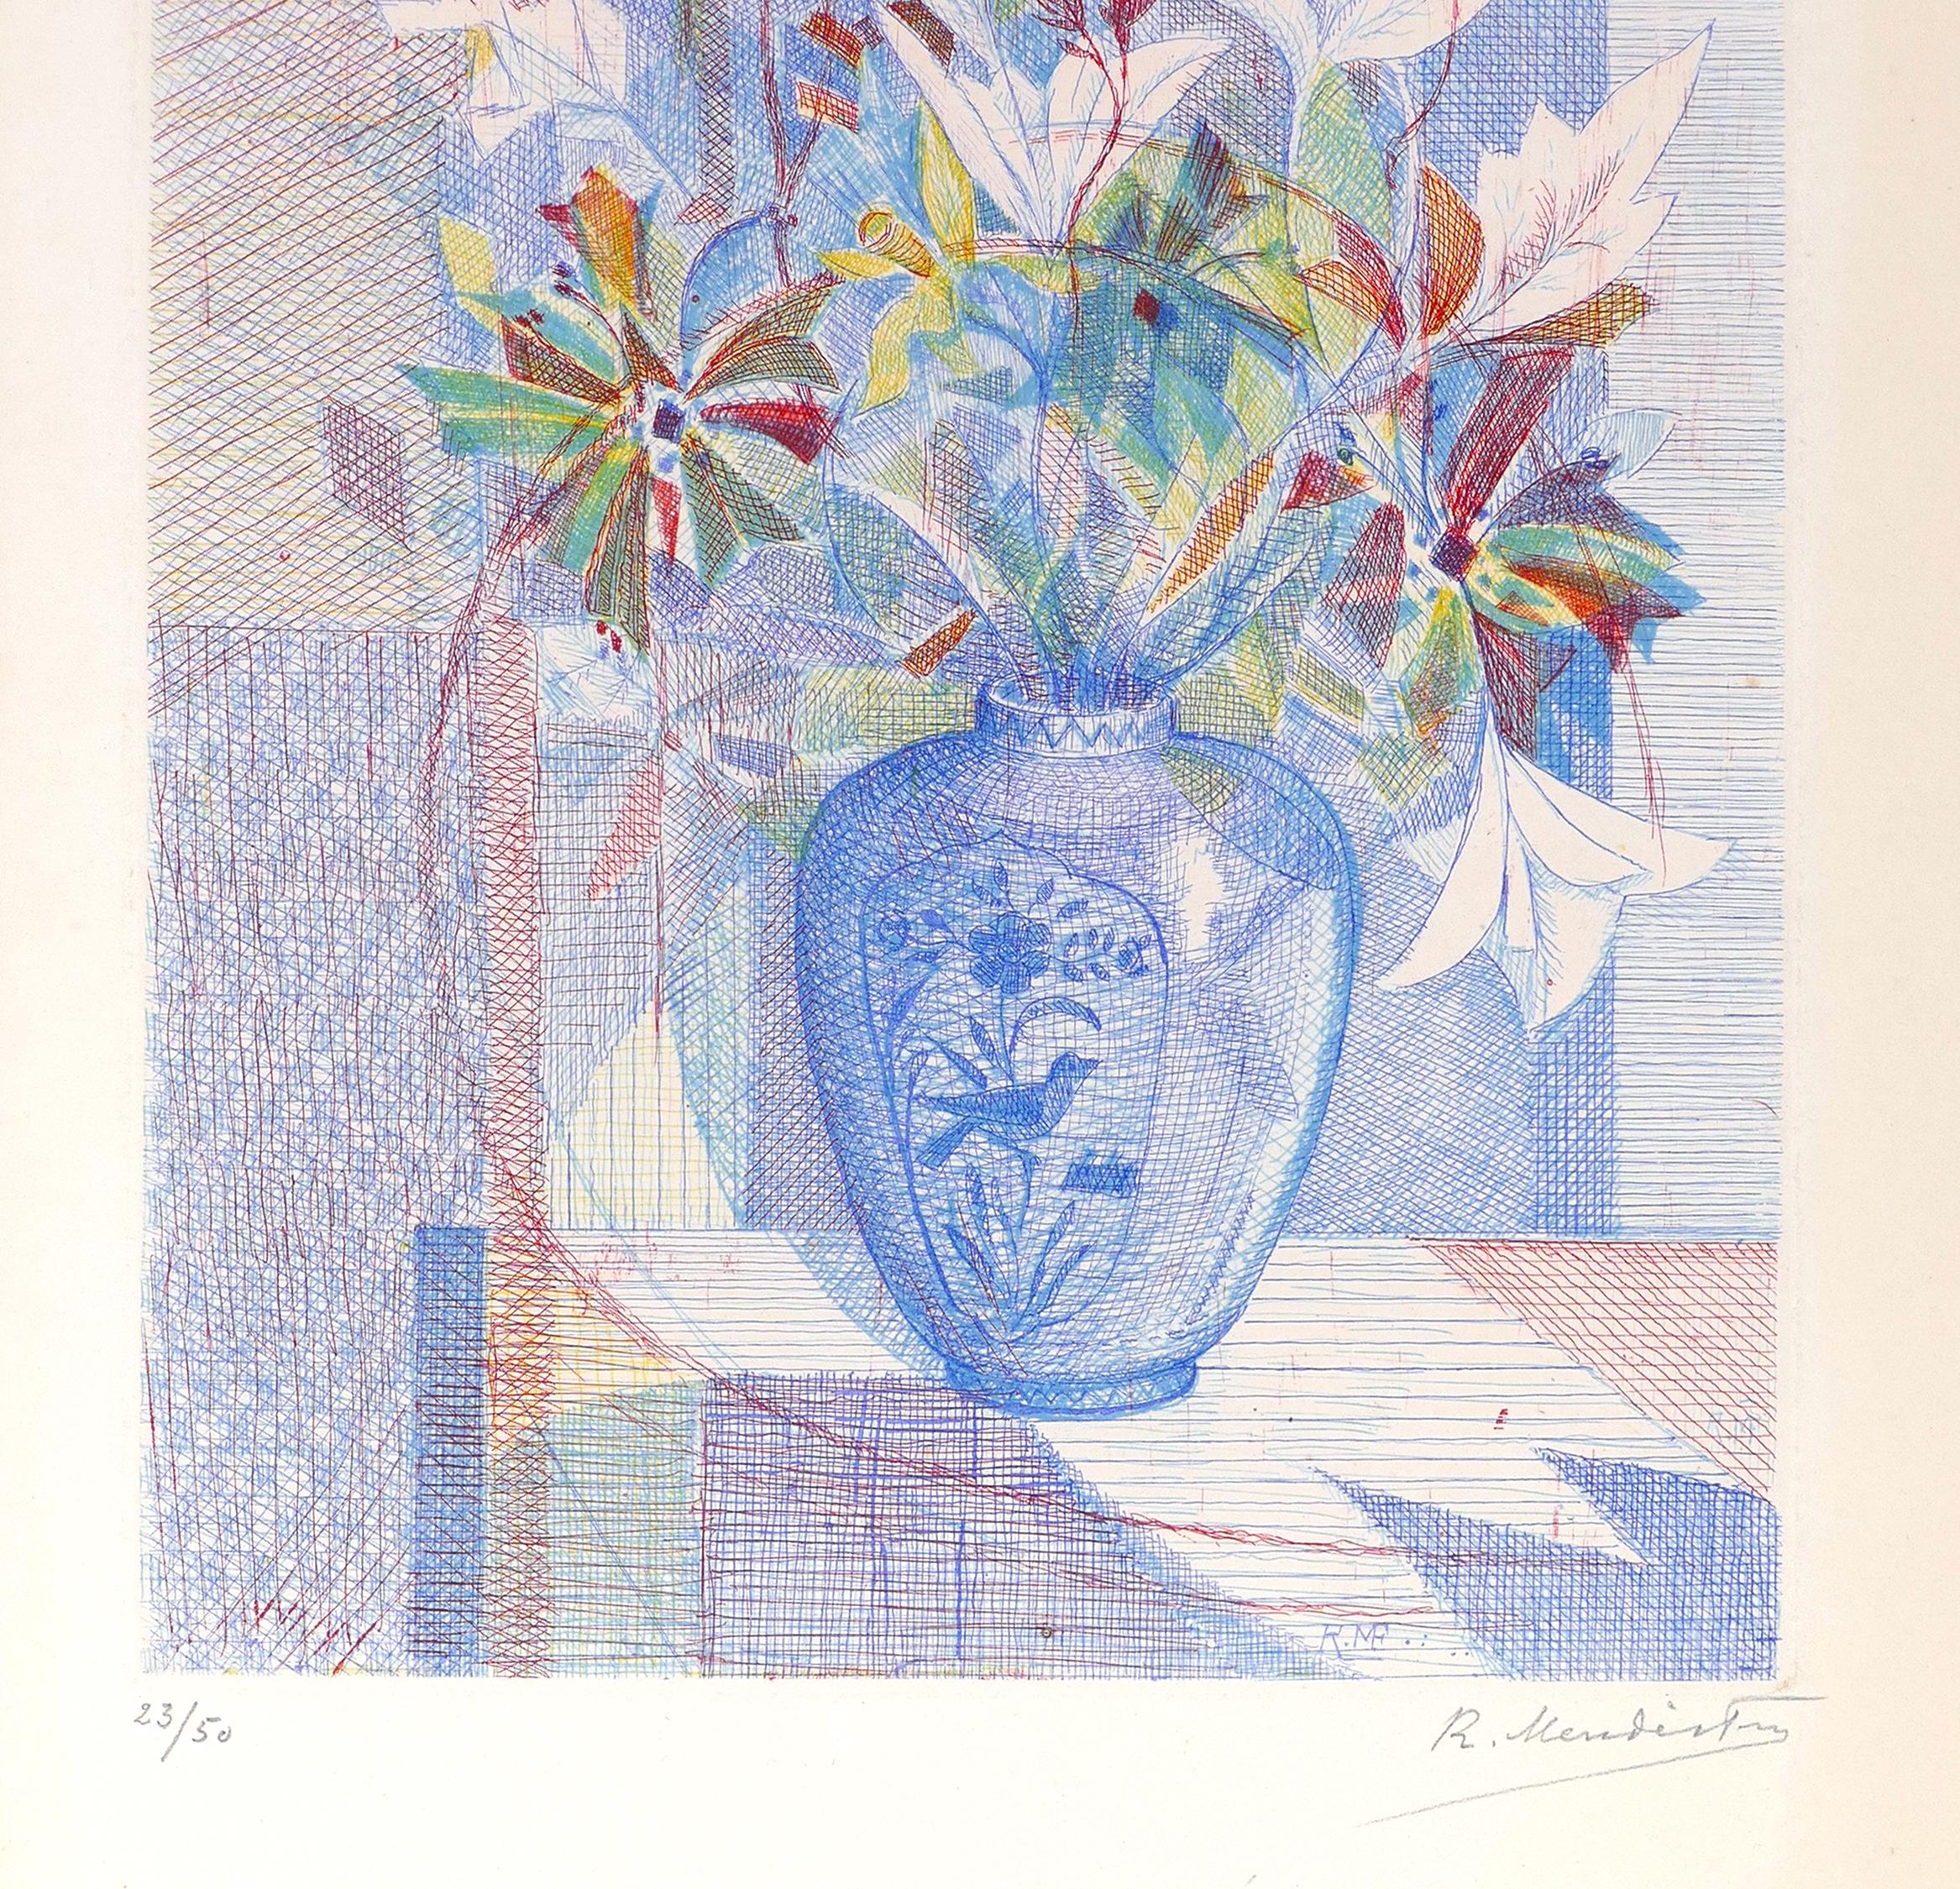 Flower Vase - Etching by R. Mendes France - Mid 1900 - Print by René Mendes France